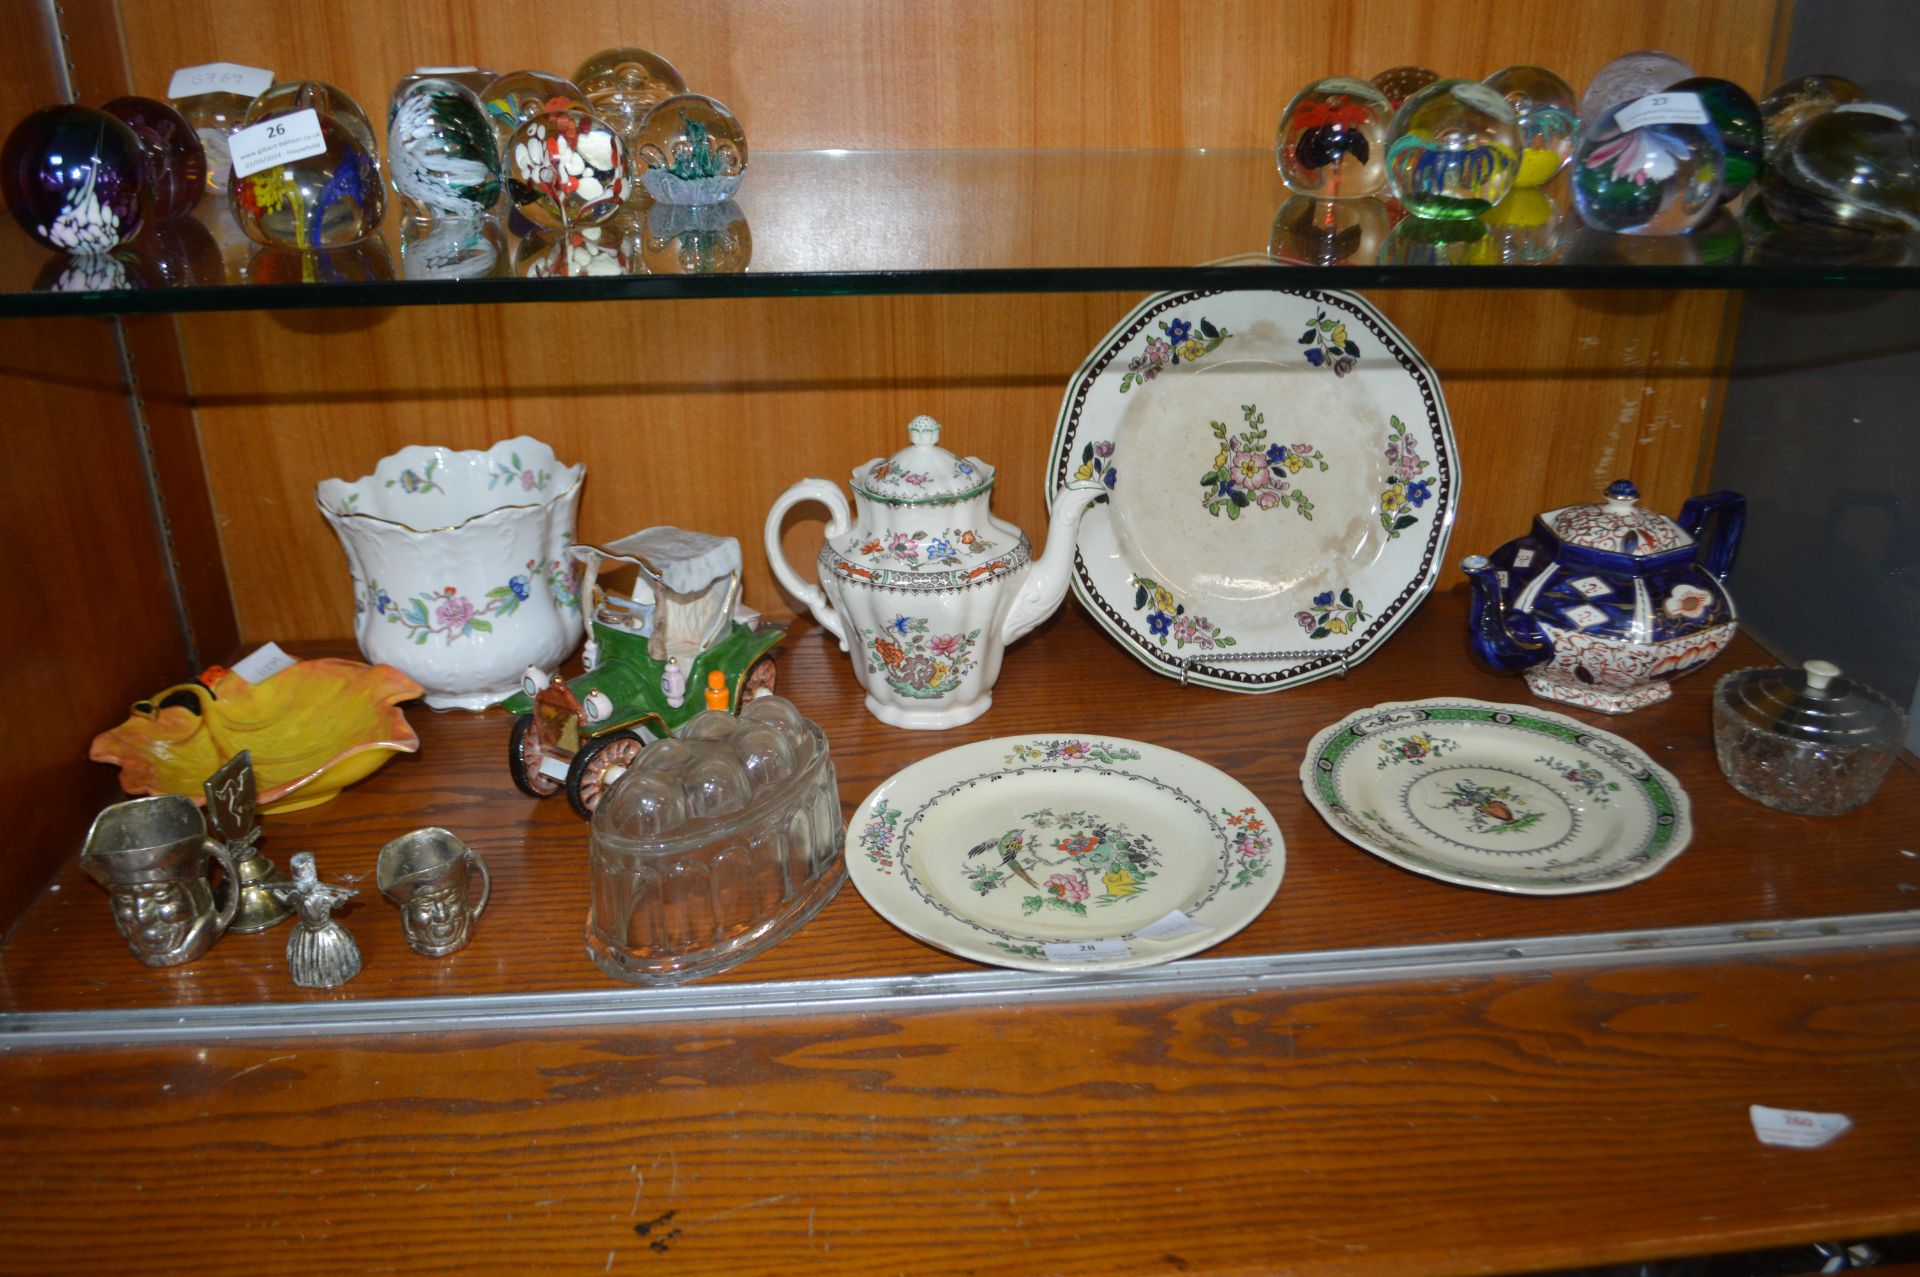 Vintage Pottery Plates and Glassware etc.